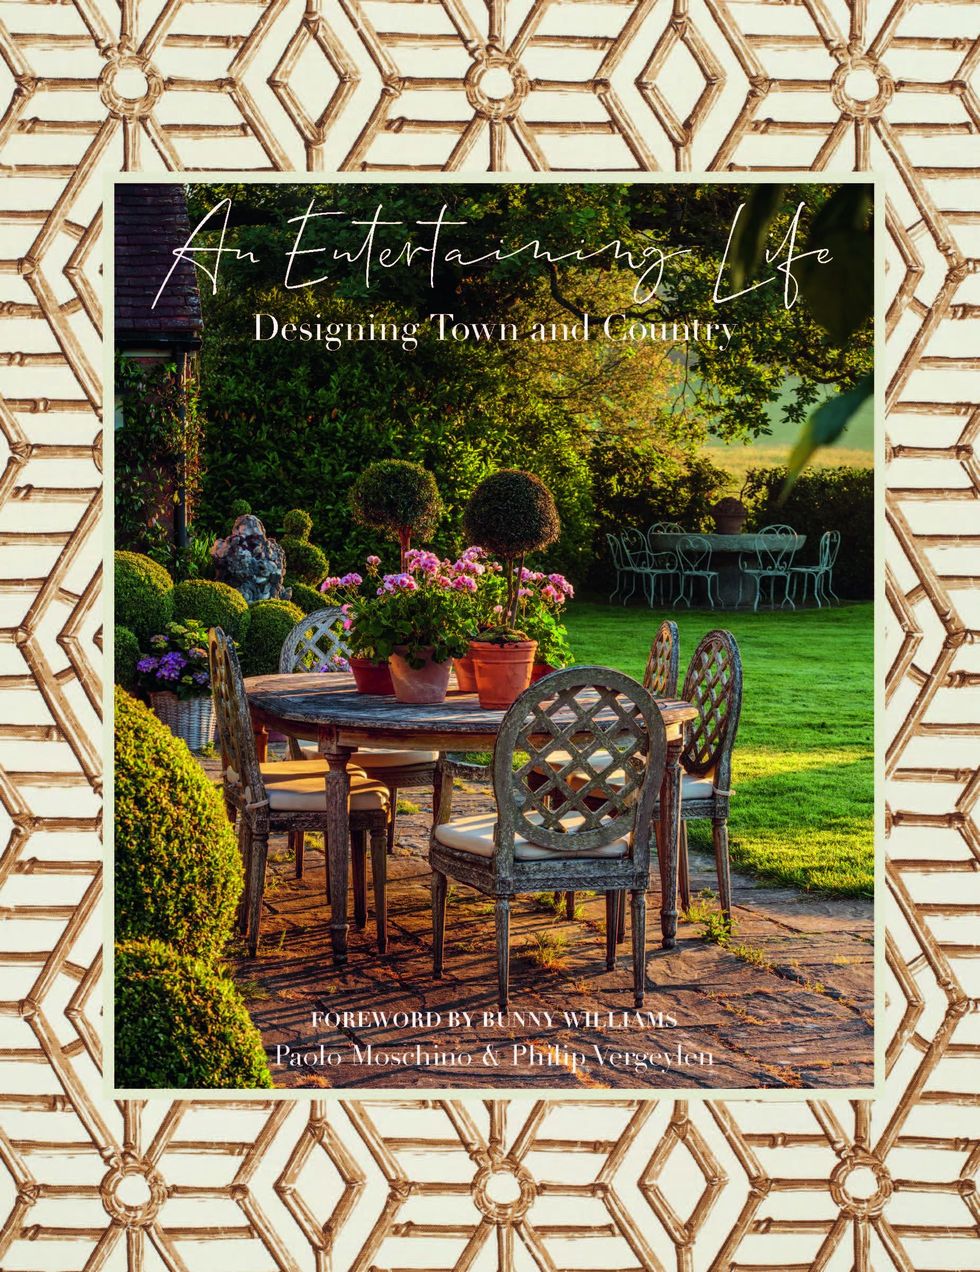 36 Beautiful Coffee Table Books for Gifting and Decorating – jane at home